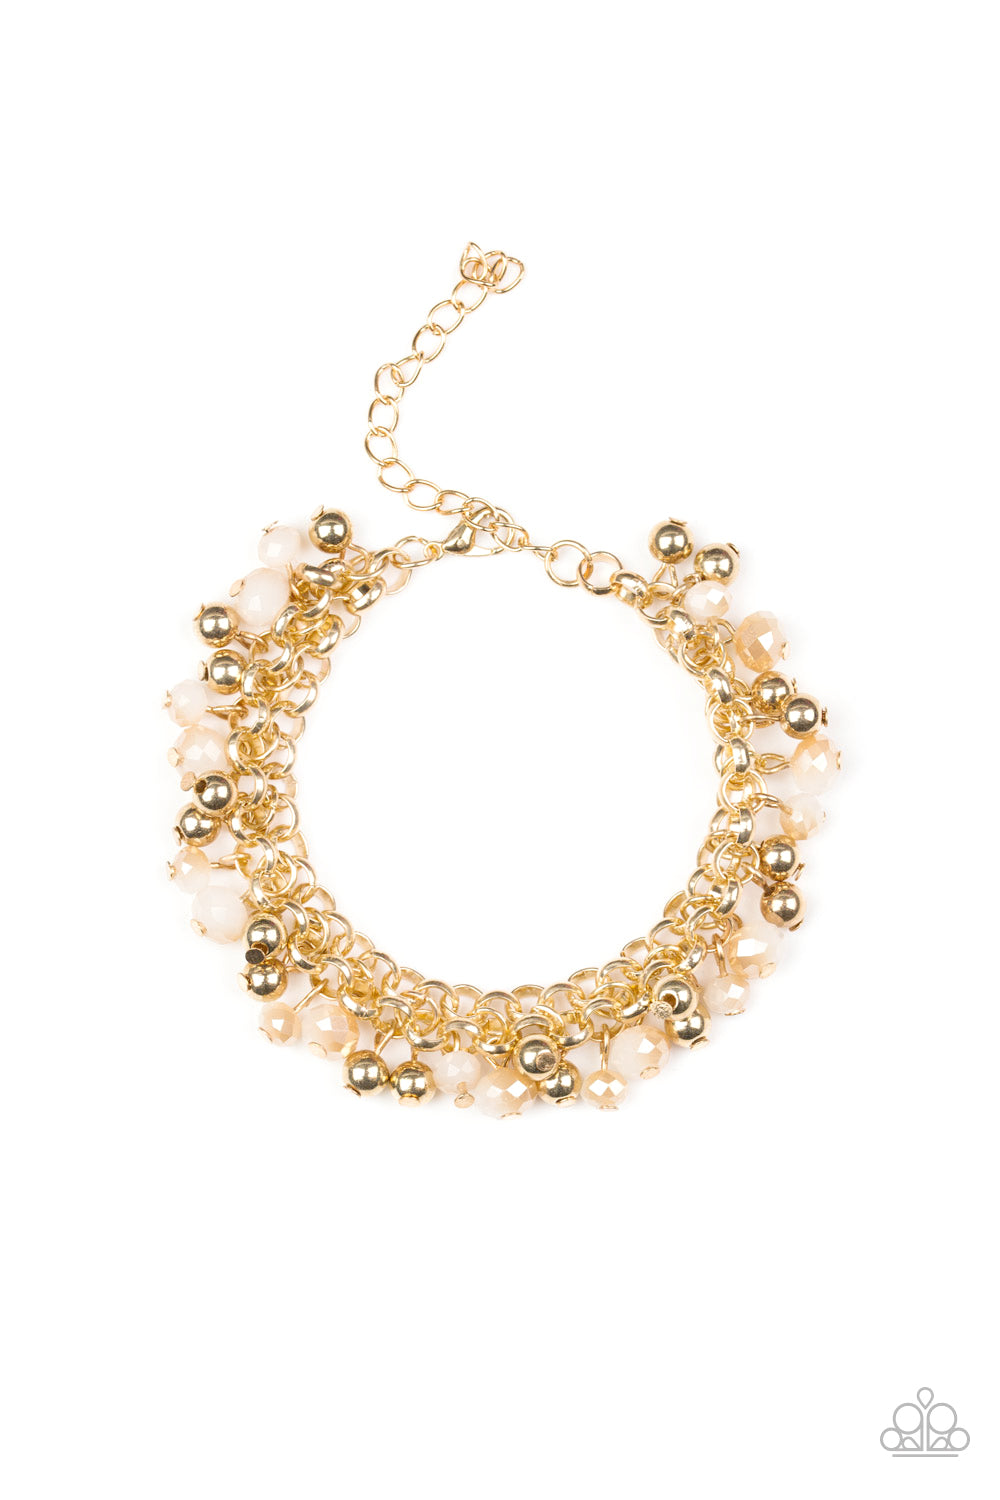 JUST FOR THE FUND OF IT! - GOLD IRIDESCENT CHARMS BRACELET